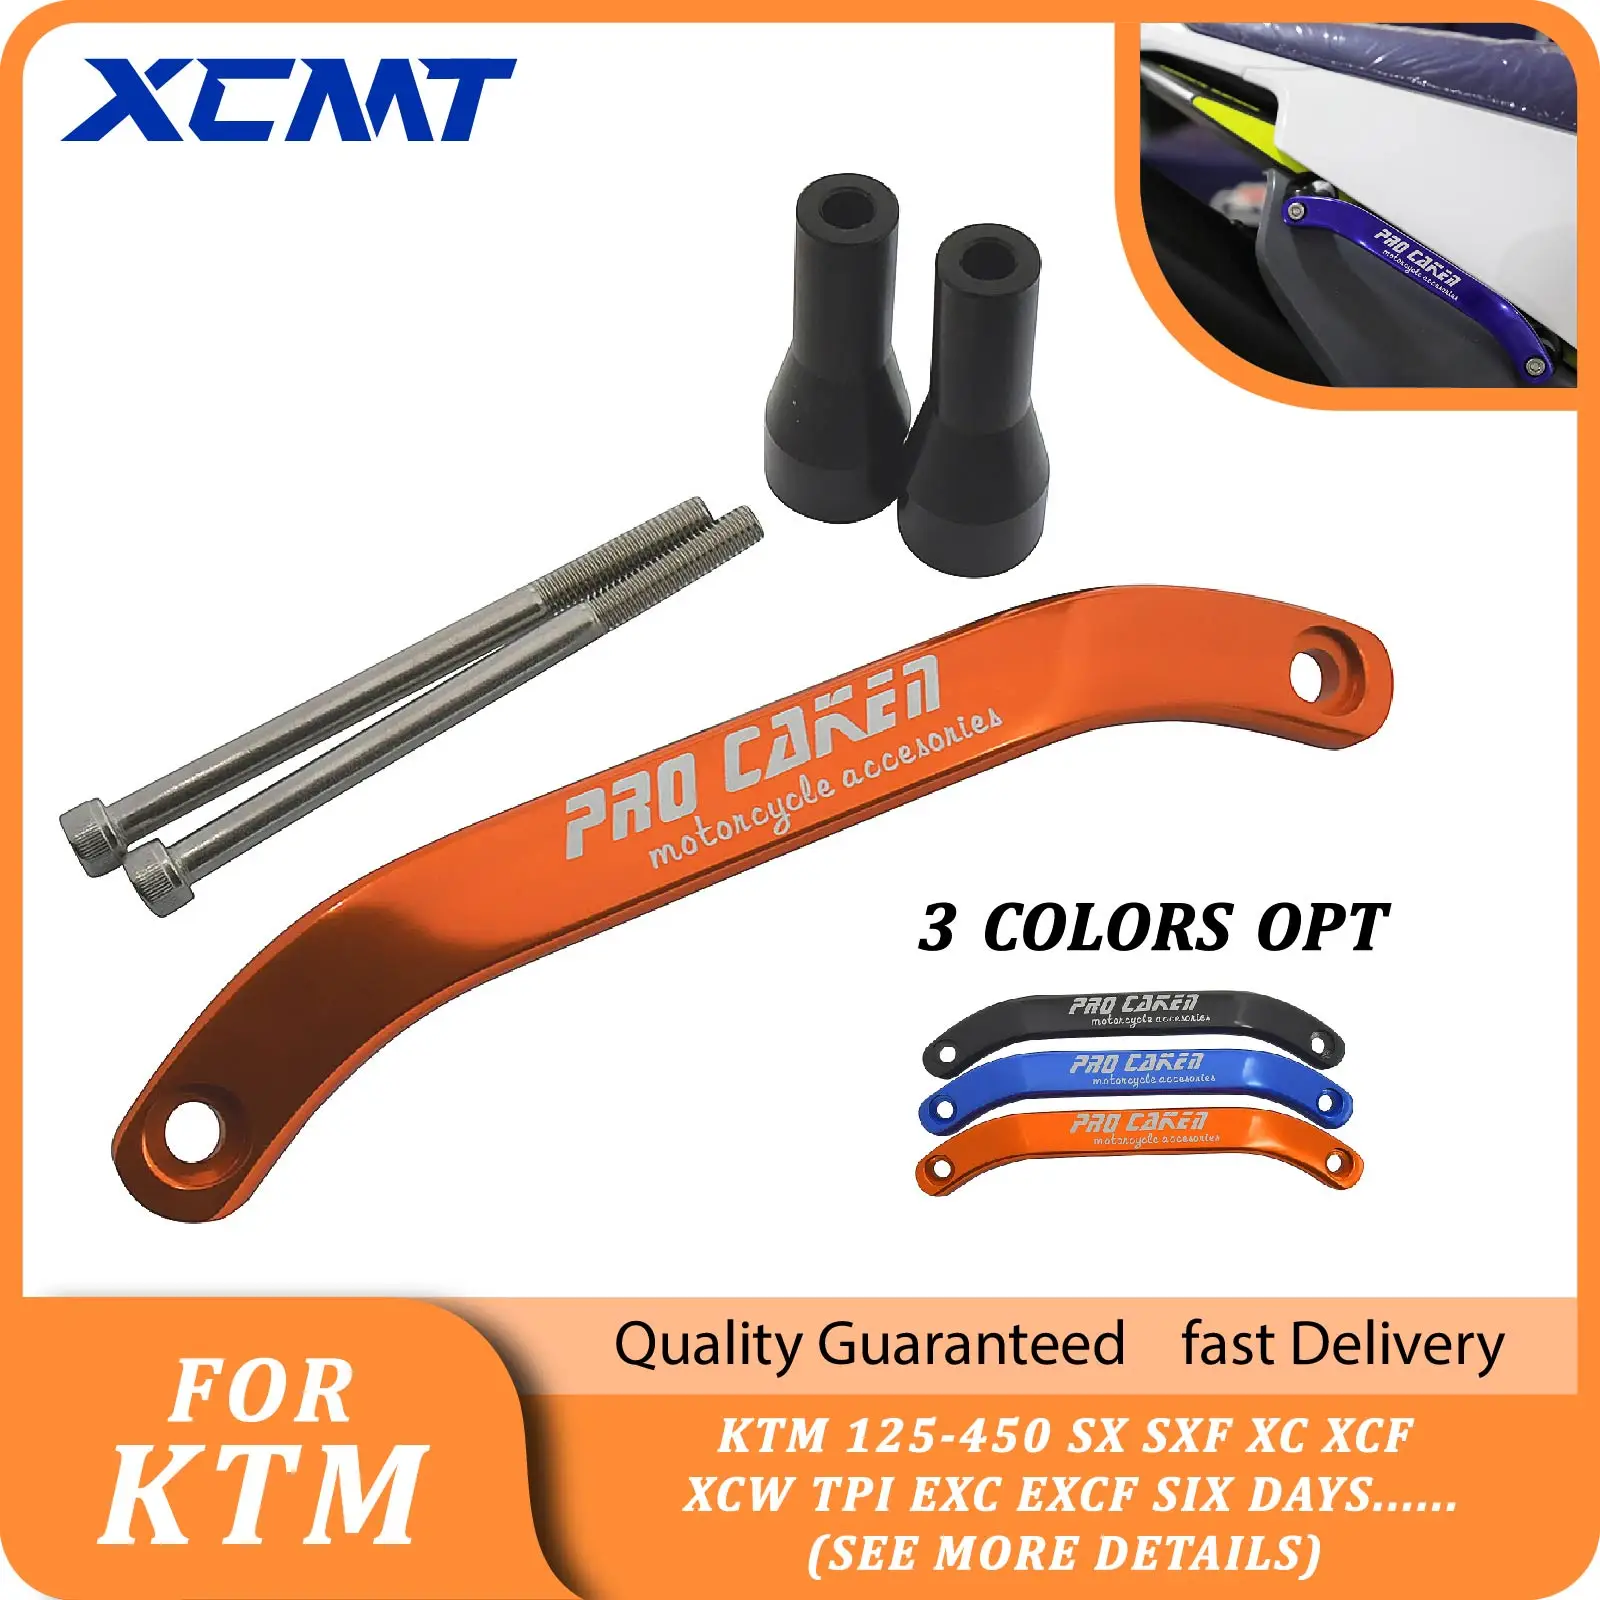 

Rear Seat Grab Handle Motorcycle CNC Rail Handle Handrail For KTM 125-450 SX SXF XC XCF XCW TPI EXC EXCF SIX DAYS 2019 2020 2022